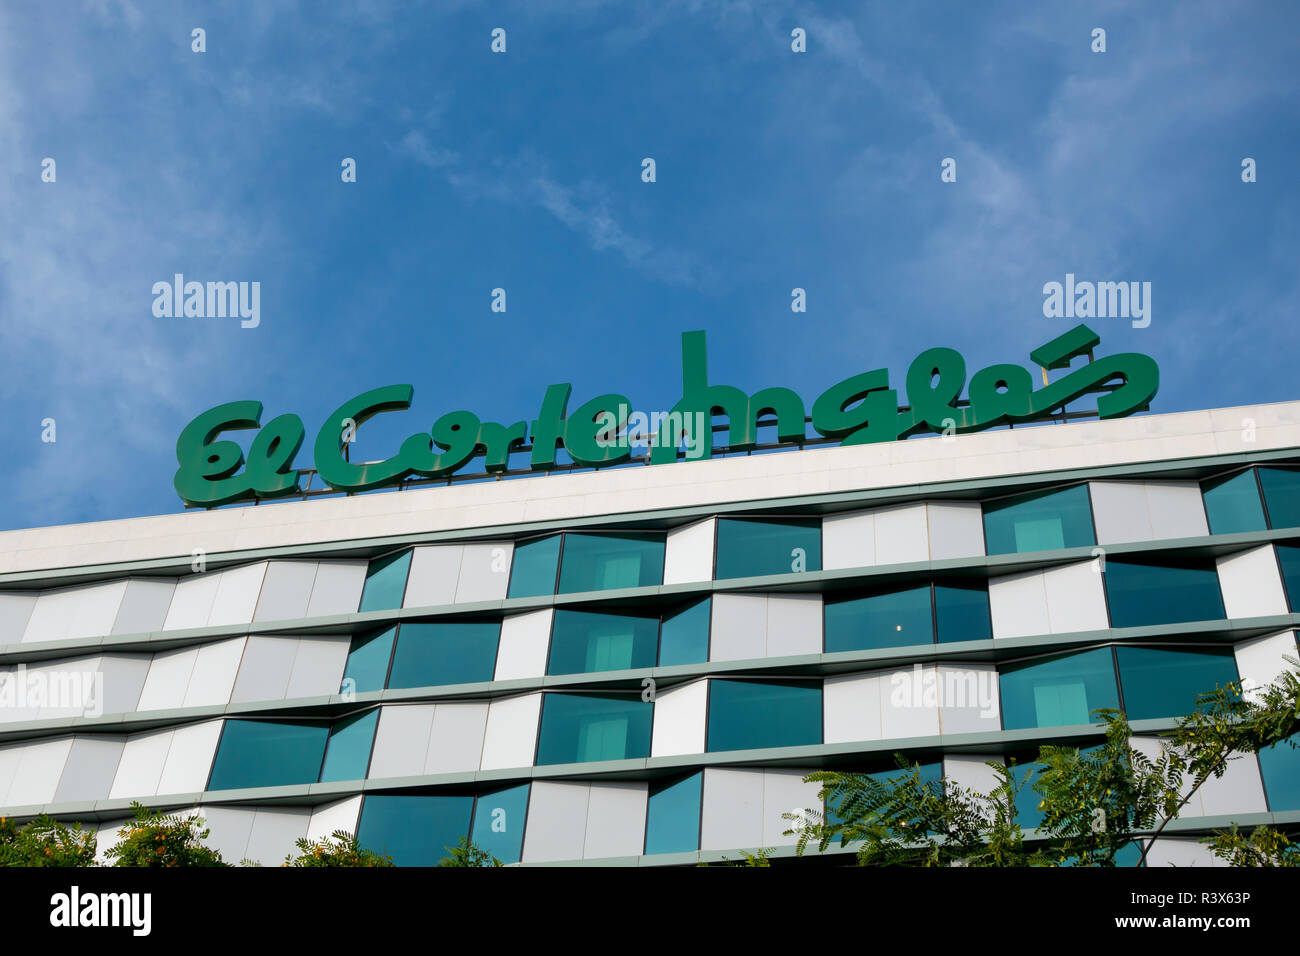 Famous shopping mall called El Corte Ingles, a large shopping center in the city of Tarragona, Spain Stock Photo